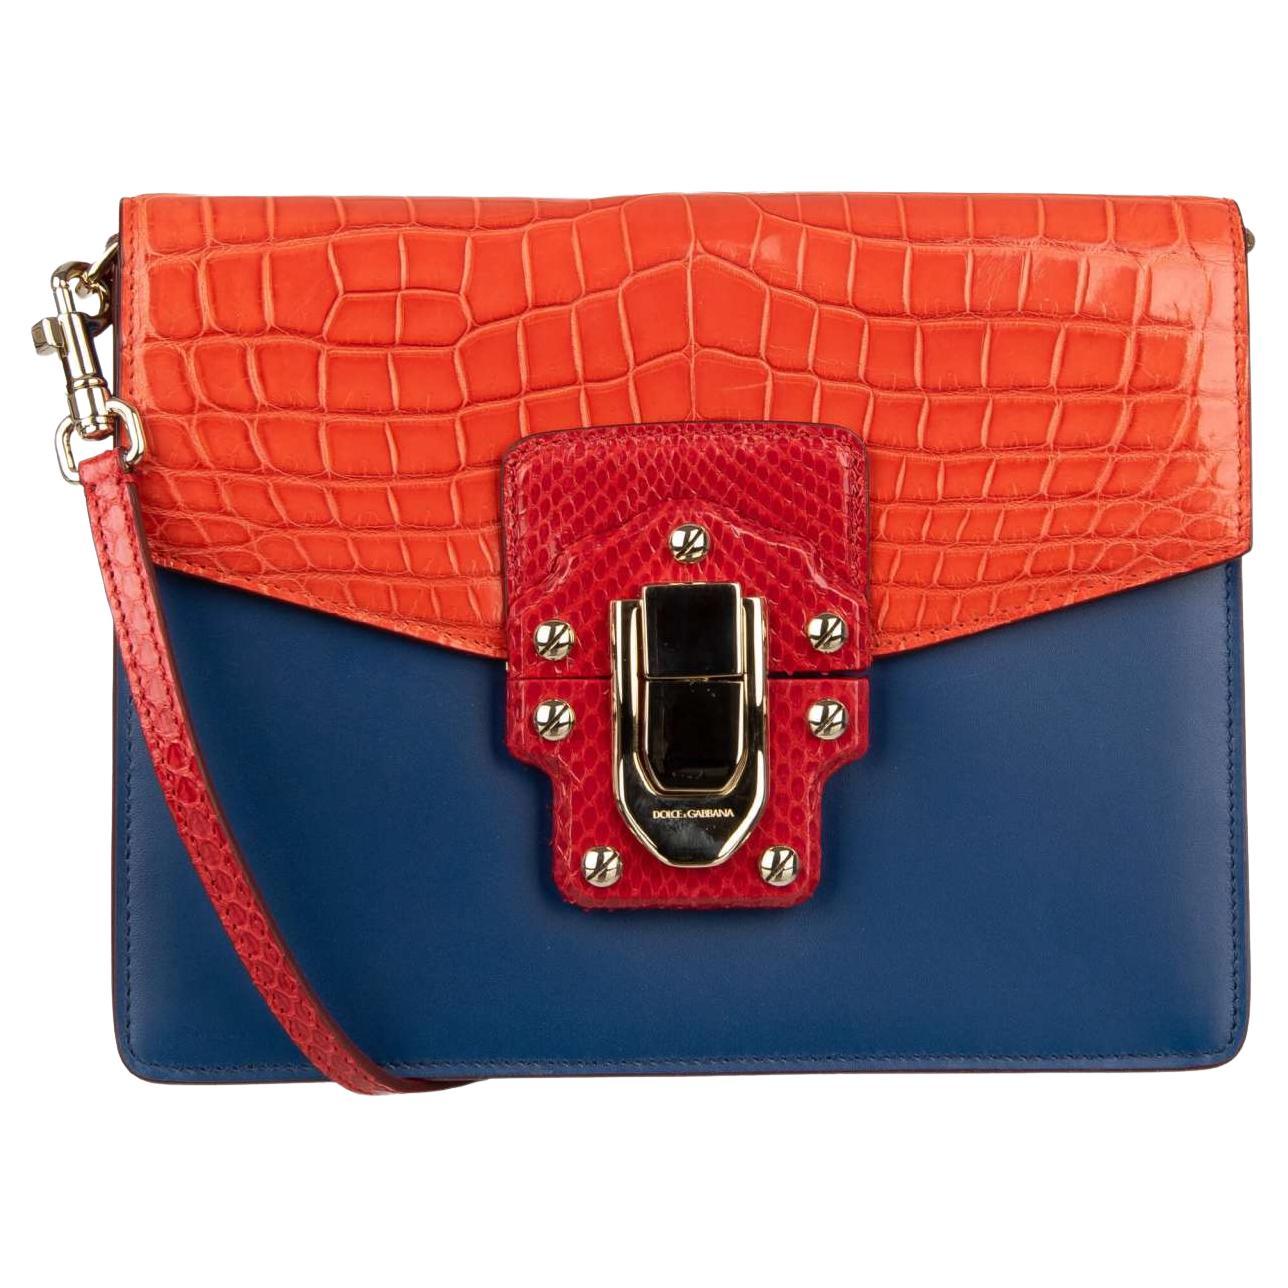 Dolce & Gabbana Croco Snake Leather Shoulder Bag LUCIA with Strap Red Pink Blue For Sale